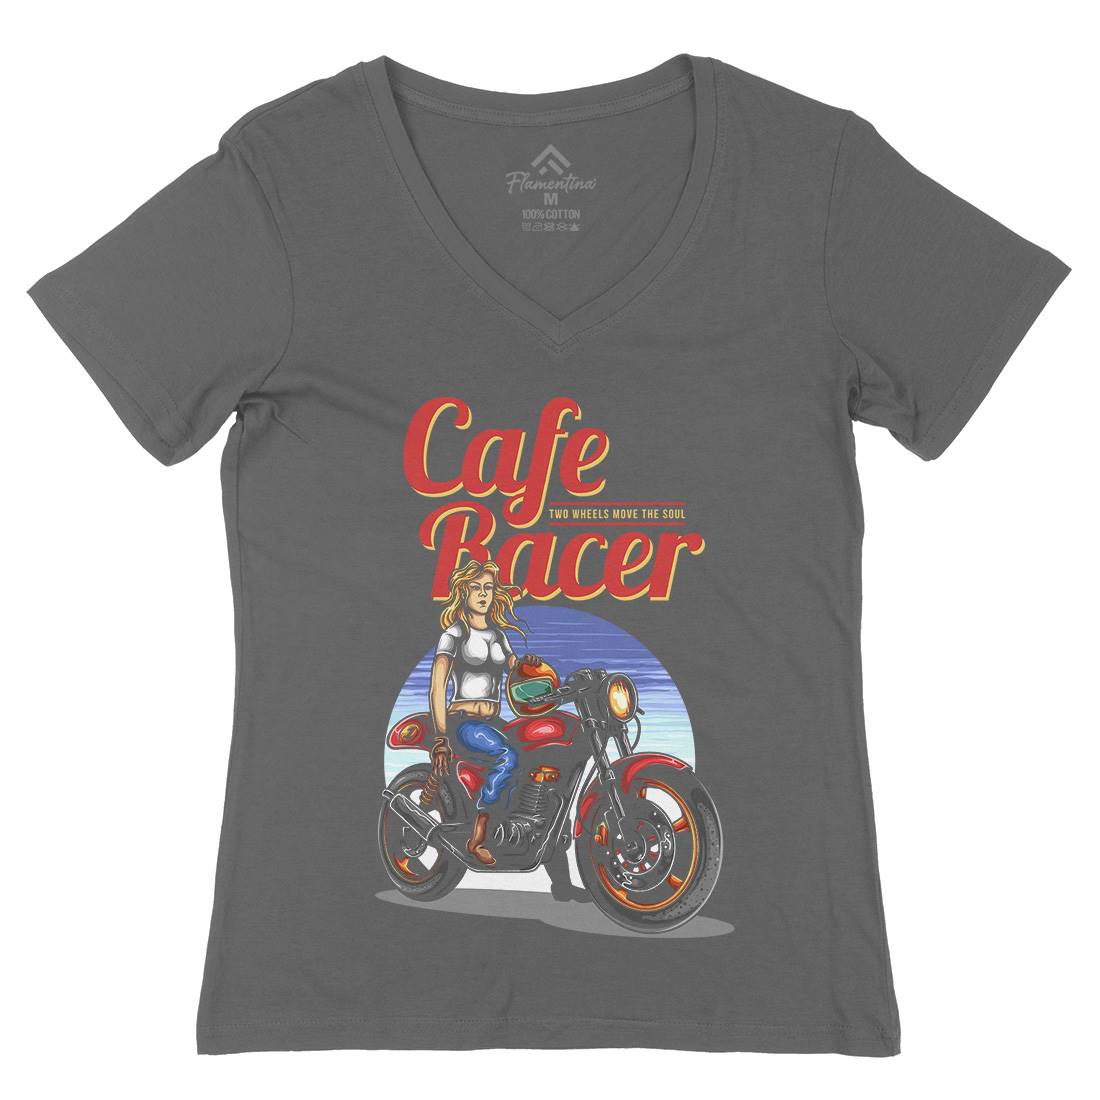 Cafe Racer Womens Organic V-Neck T-Shirt Motorcycles A407